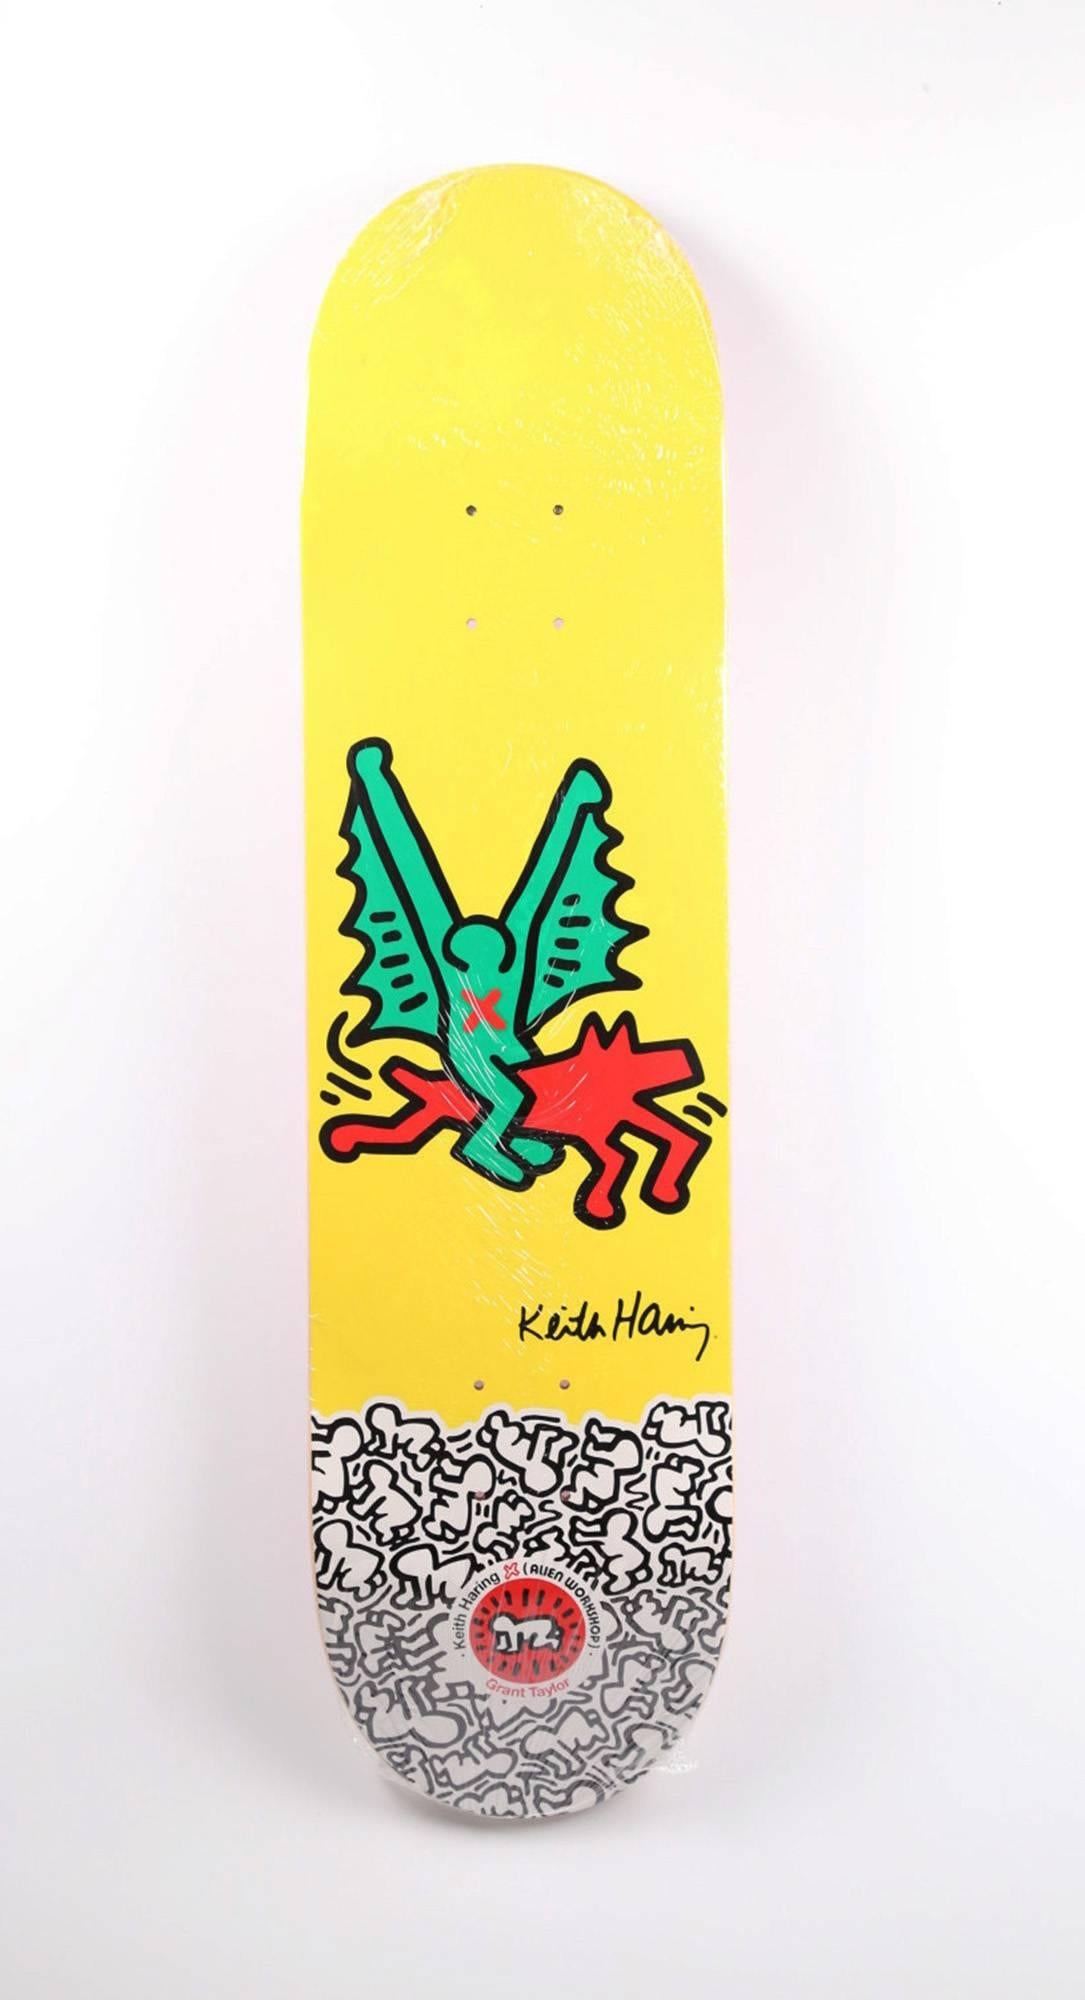 Keith Haring set of 10 skateboard decks (Keith Haring alien workshop) - Brown Figurative Print by (after) Keith Haring